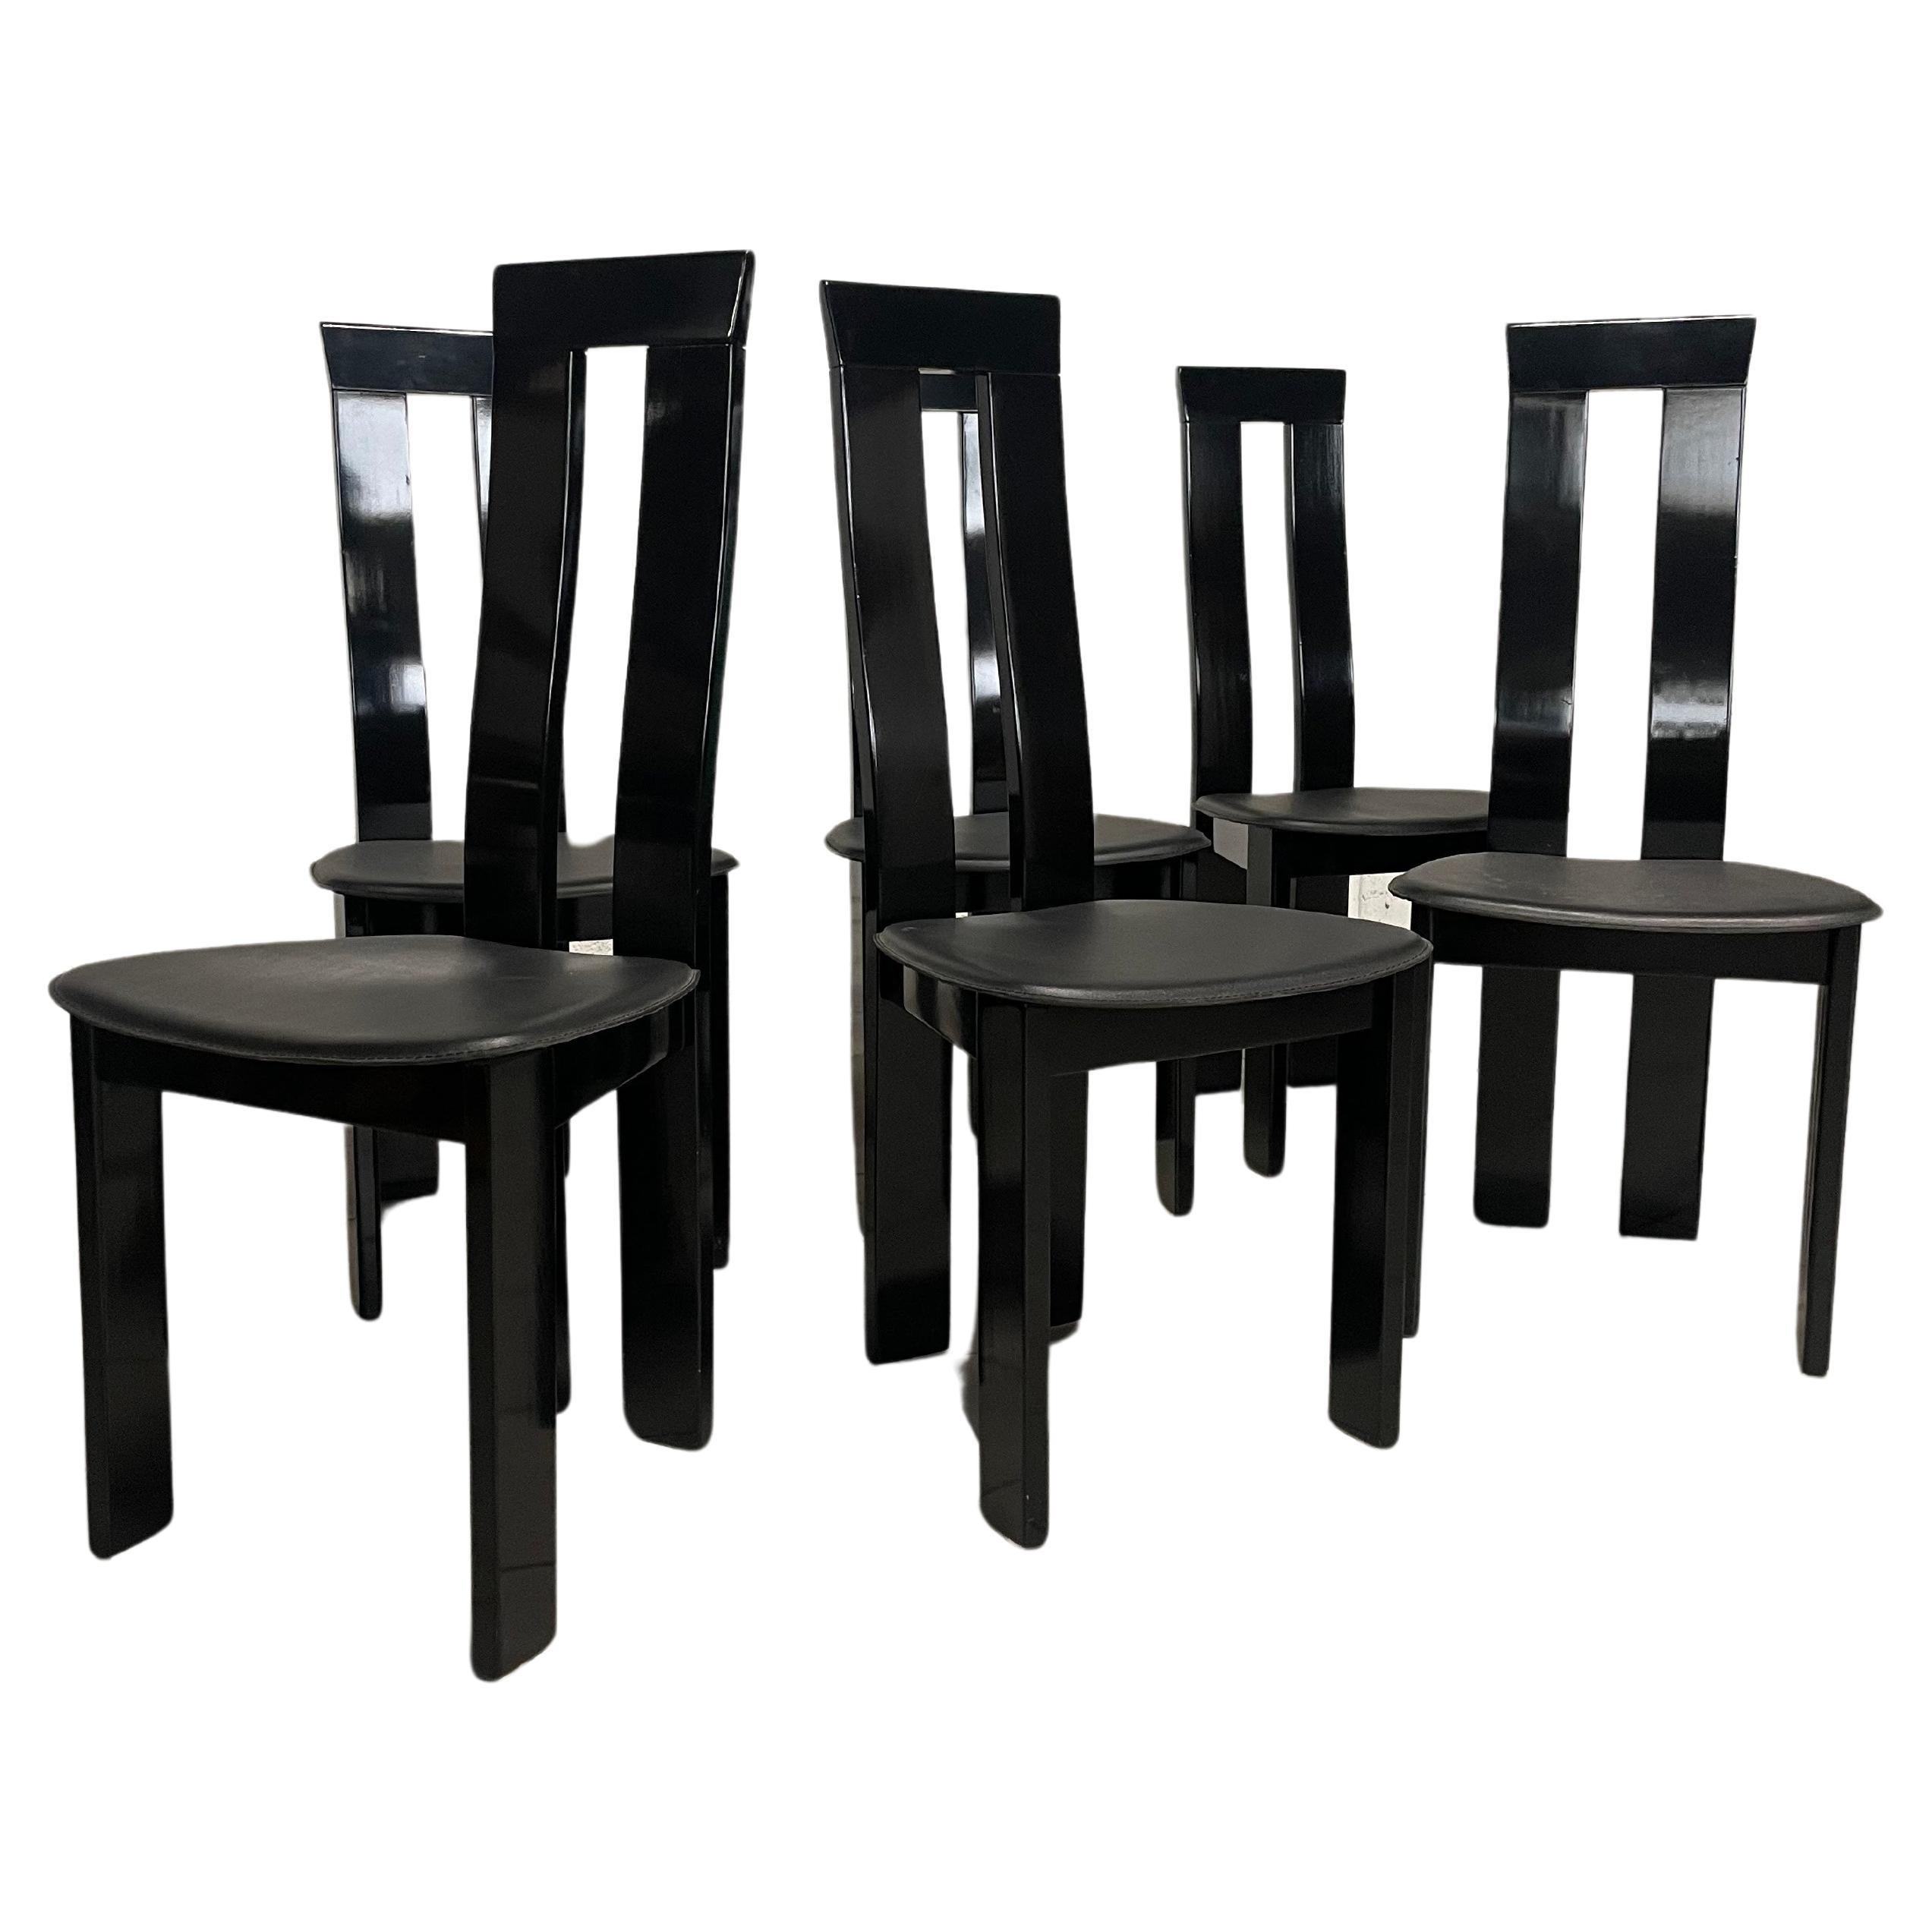 Set of 6 chairs from the 1970s in the style of Pietro Costantini